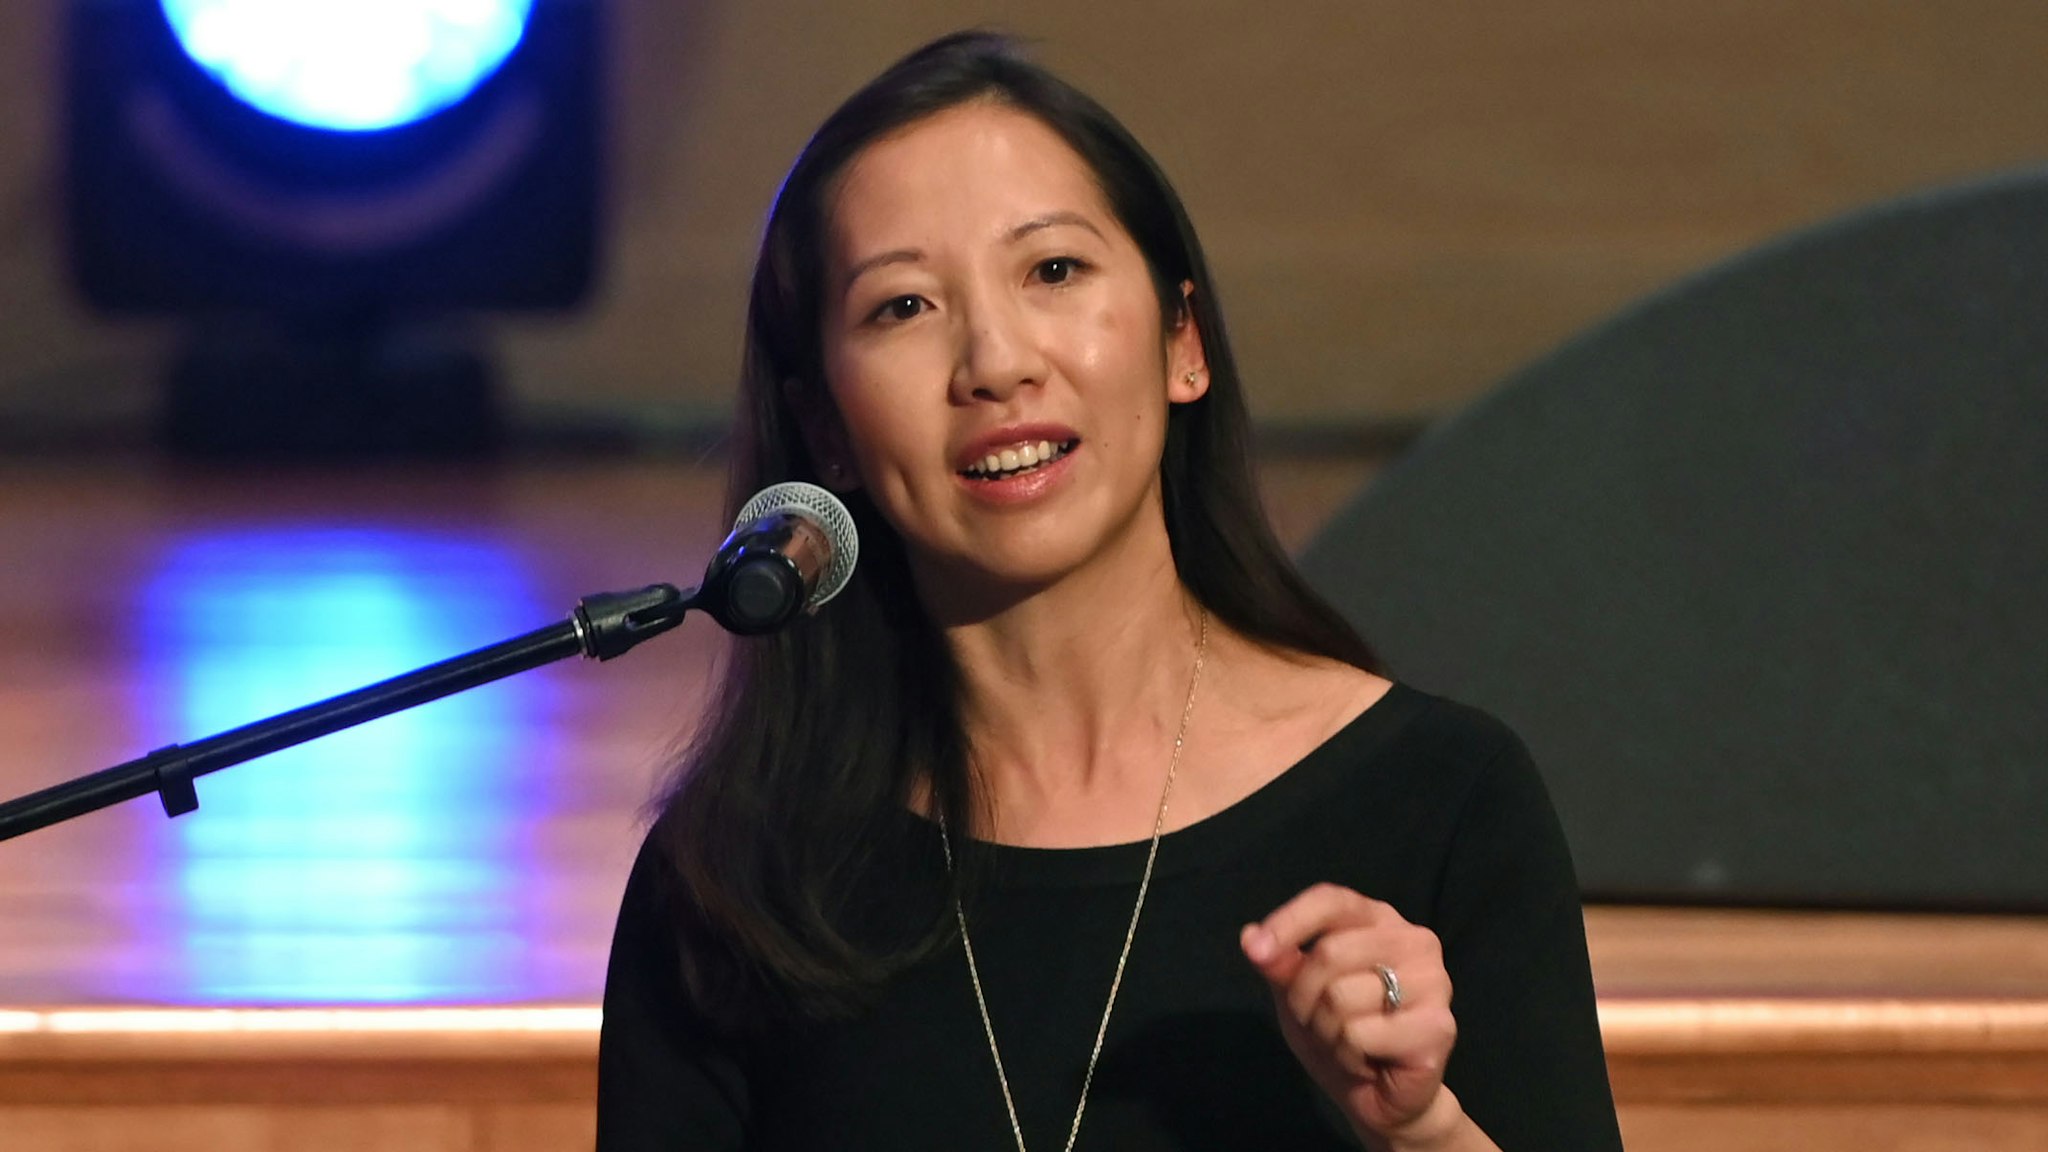 BALTIMORE, MARYLAND - OCTOBER 25: Dr. Leana Wen speaks during the funeral services for late U.S. Representative Elijah Cummings (D-MD) at the New Psalmist Baptist Church October 25, 2019 in Baltimore, Maryland. A sharecropper’s son who rose to become a civil rights champion and the chairman of the powerful House Oversight and Government Reform Committee, Cummings died last week of complications from longstanding health problems at the age of 68.